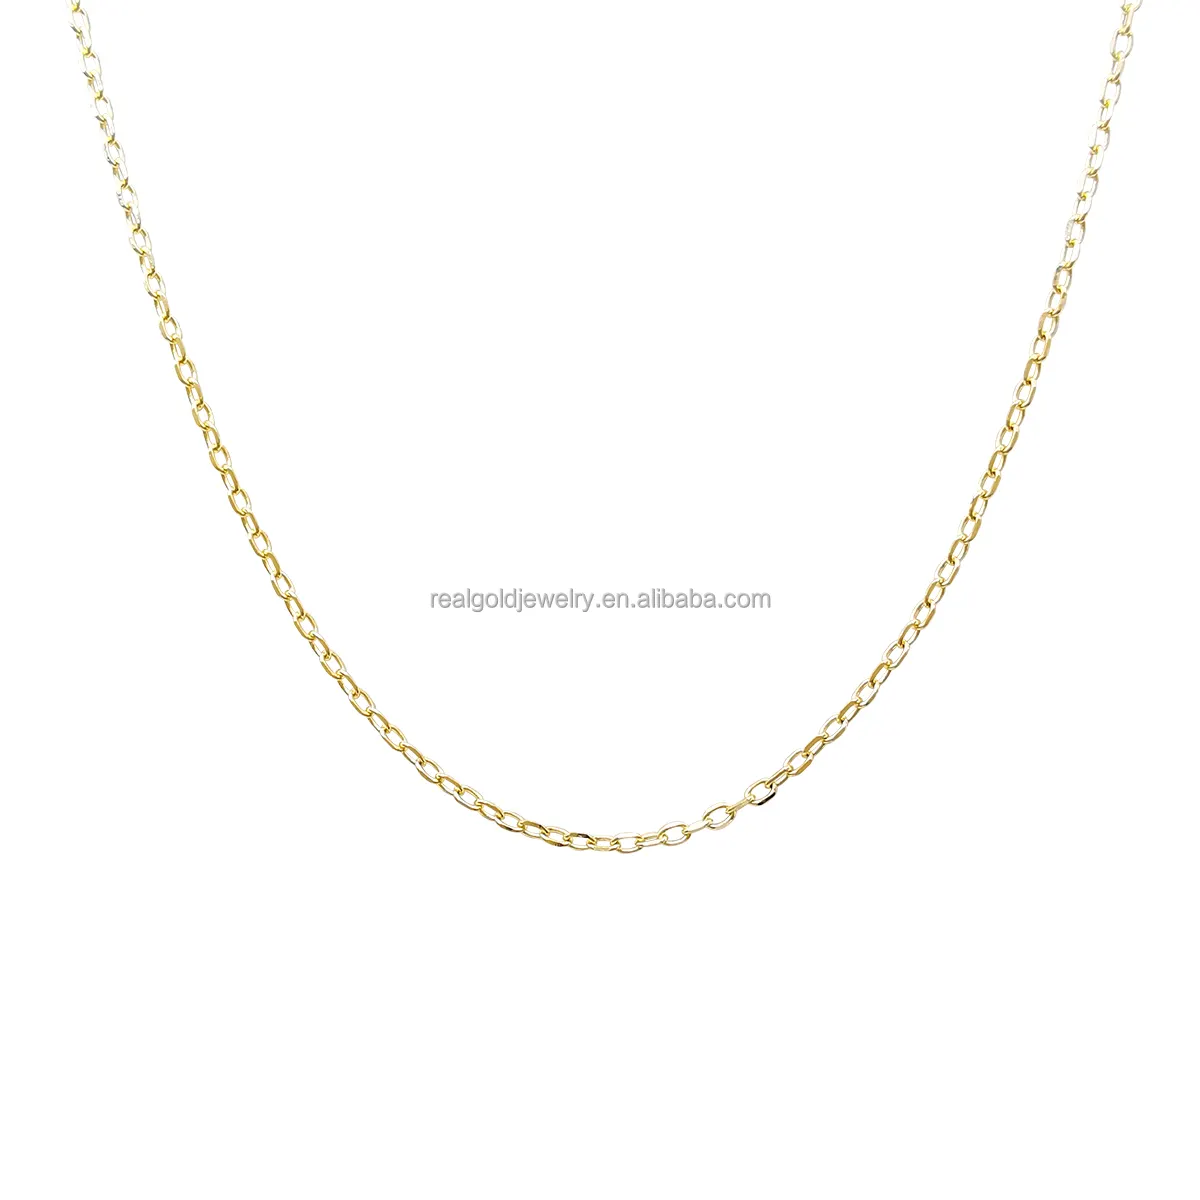 Factory Wholesale Real 14K Solid Gold Cross Chain Lighter Thinner Chains 585 Gold Fine Jewelry Necklace